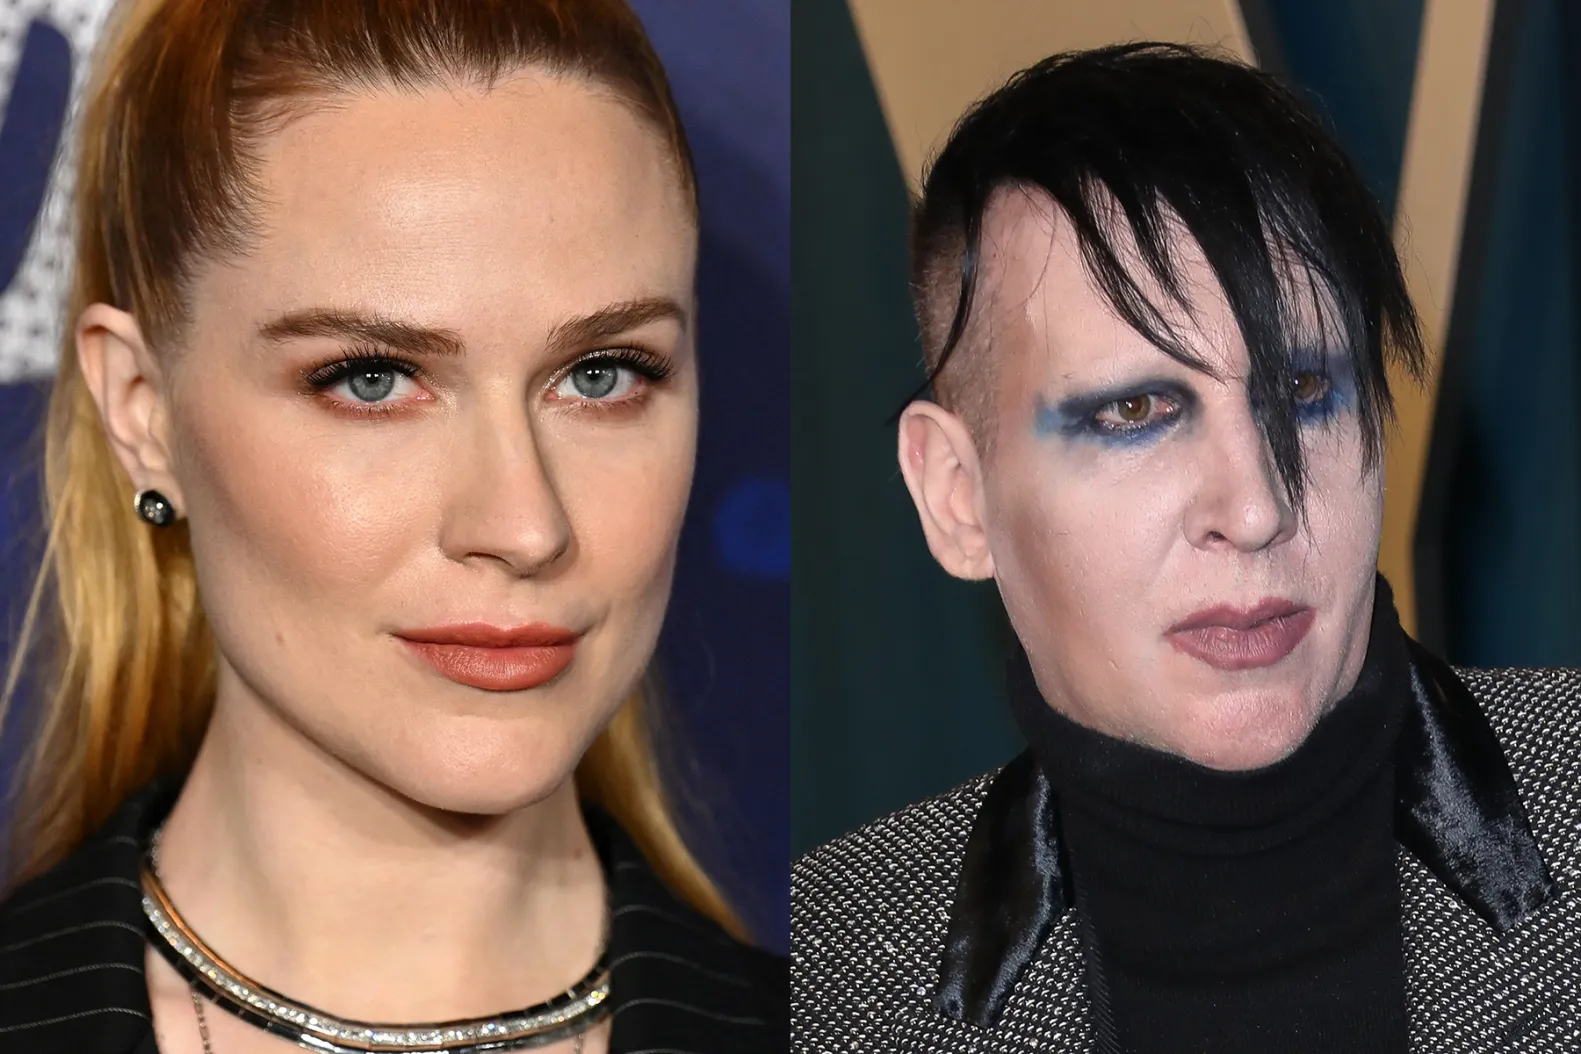 Marilyn Manson Ordered to Pay Evan Rachel Wood’s Six-Figure Legal Tab for Nixed Lawsuit Claims